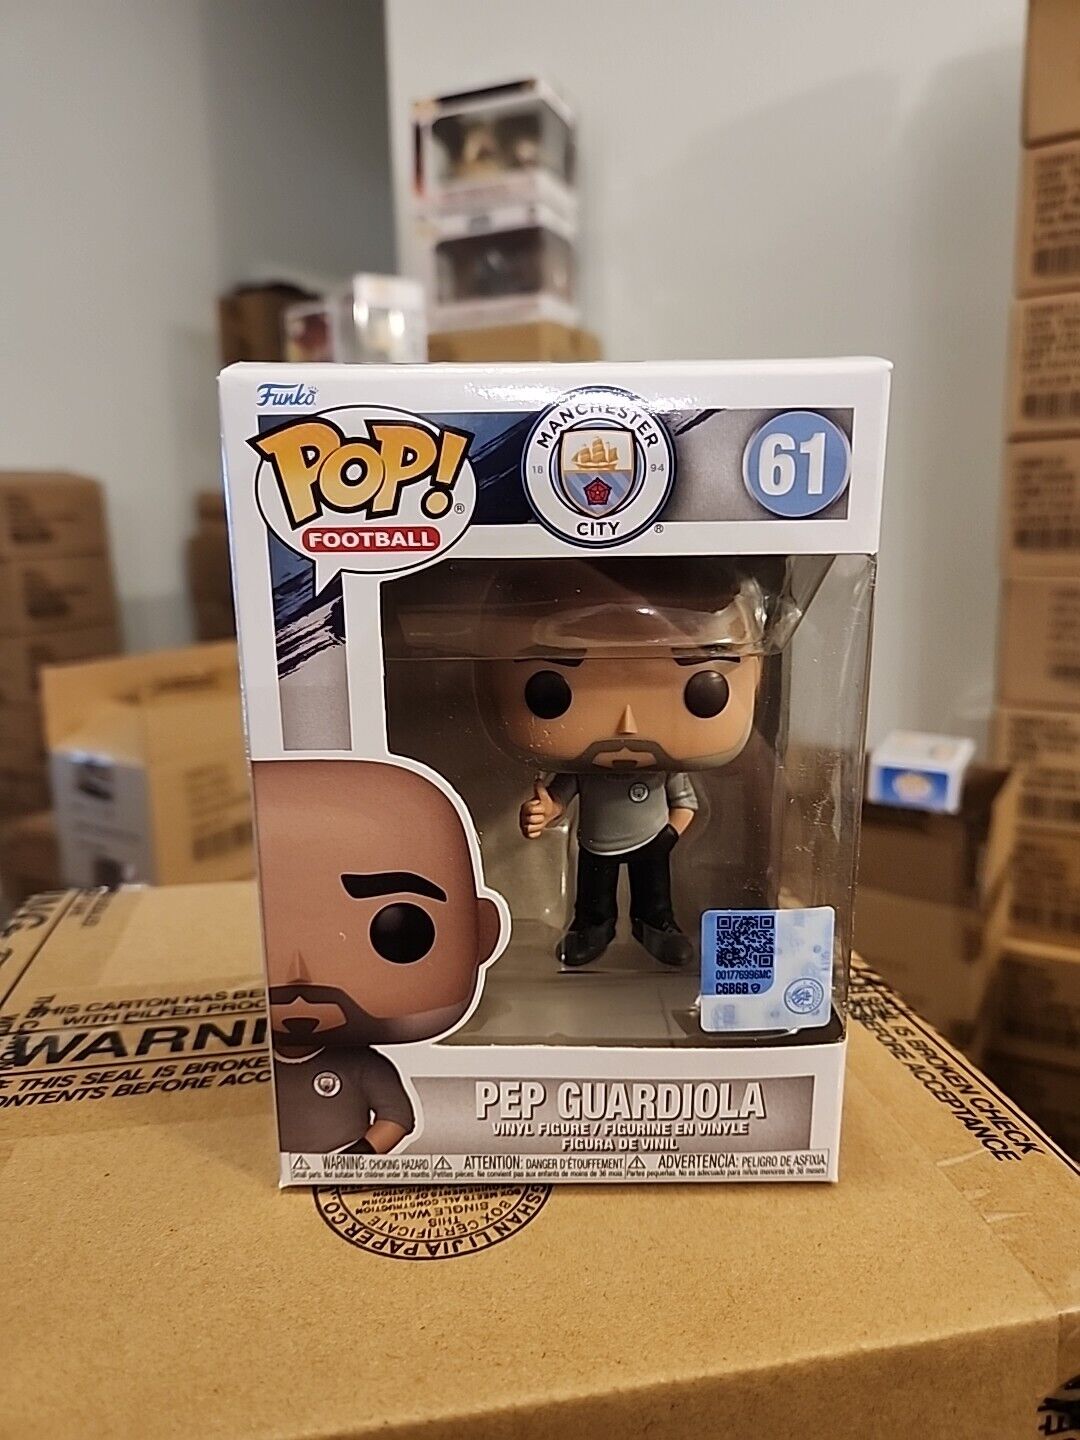 Football - Pep Guardiola #61 Manchester City Funko Pop - See Pictures